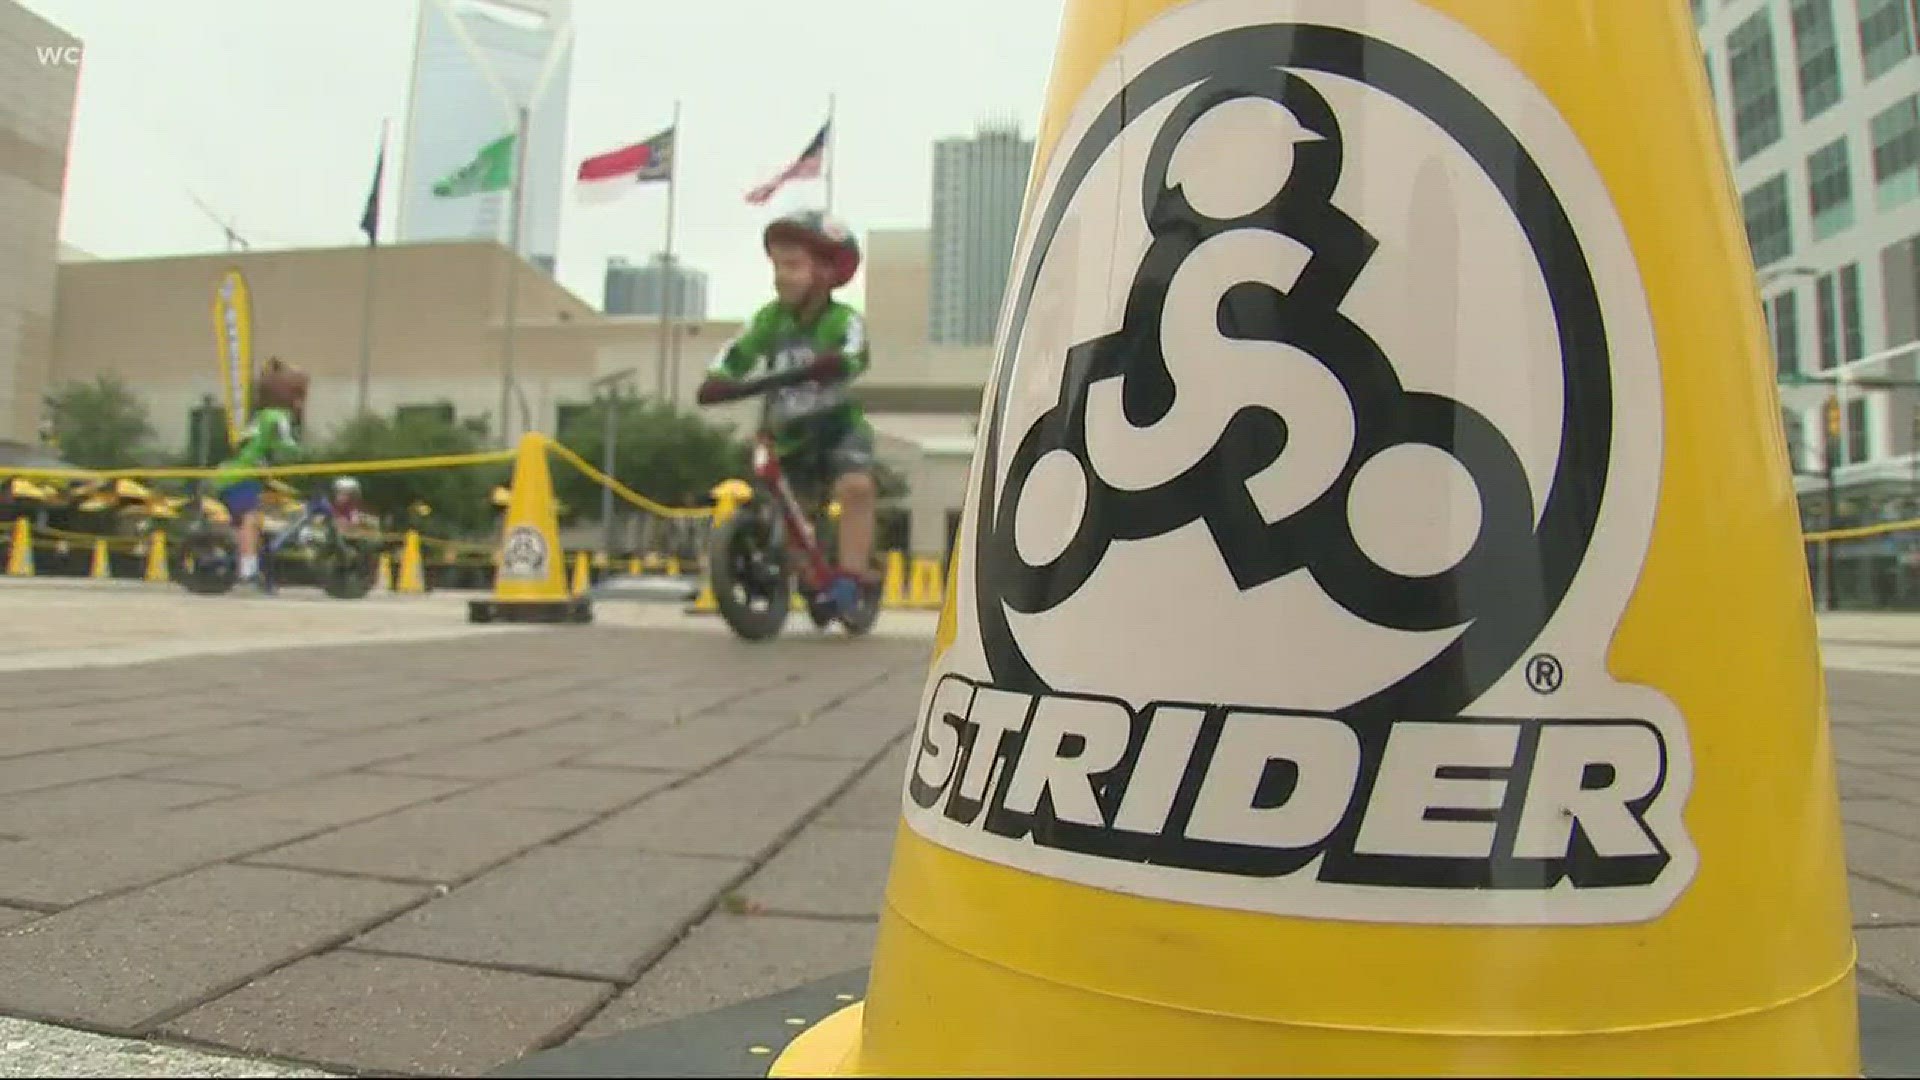 Kiddos, start your engines! The NASCAR Hall of Fame is hosting its annual "strider" race this weekend in uptown.